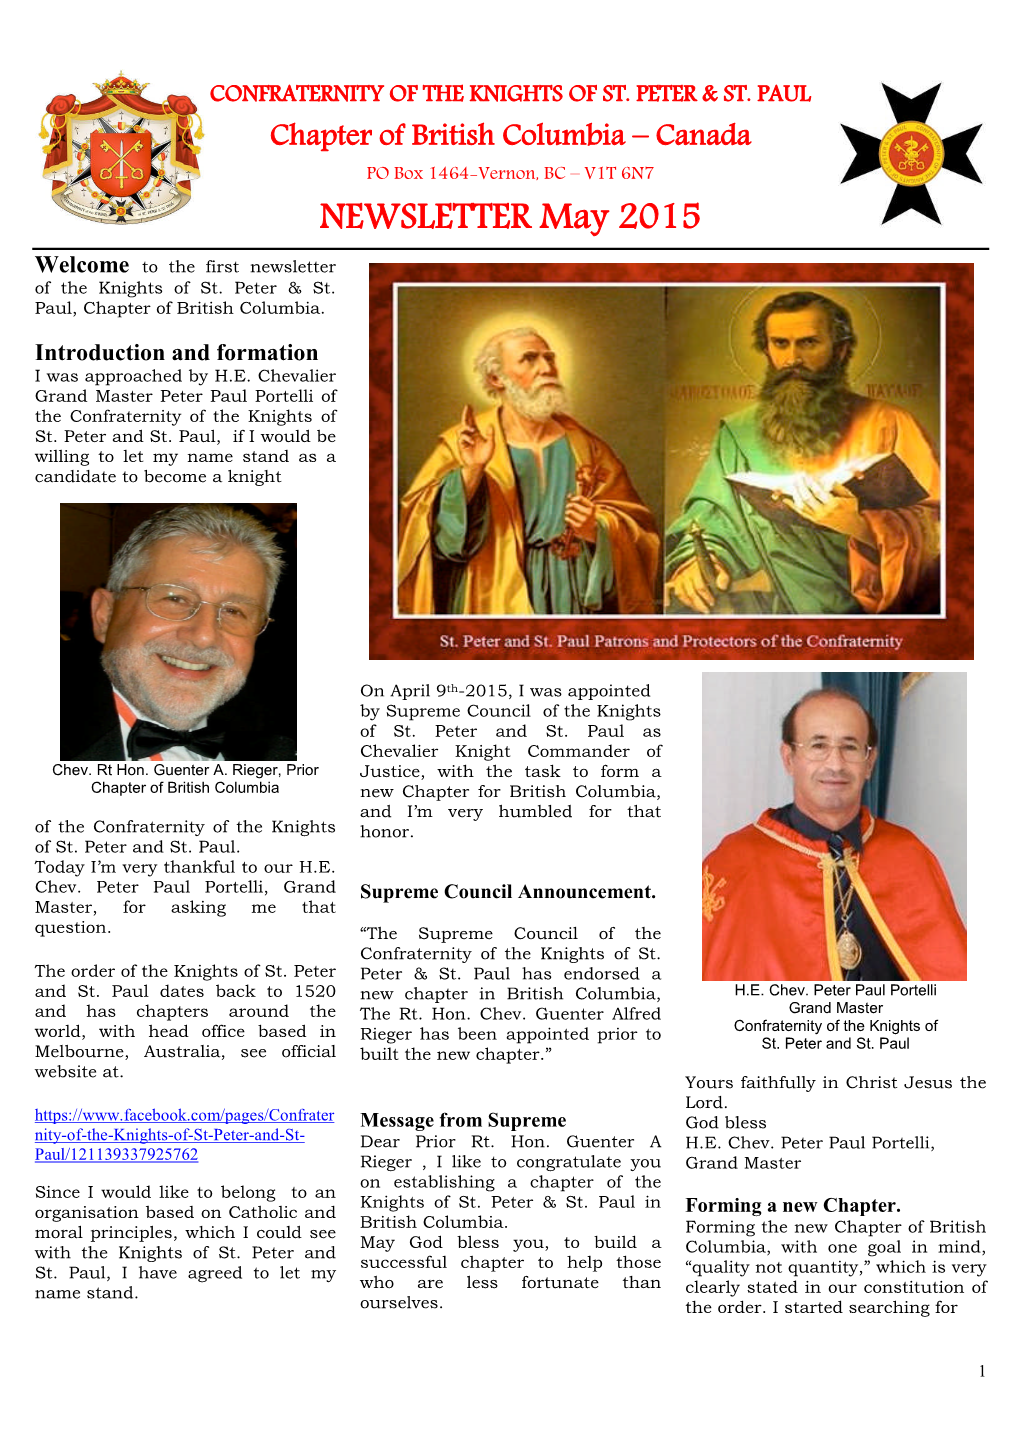 NEWSLETTER May 2015 Welcome to the First Newsletter of the Knights of St